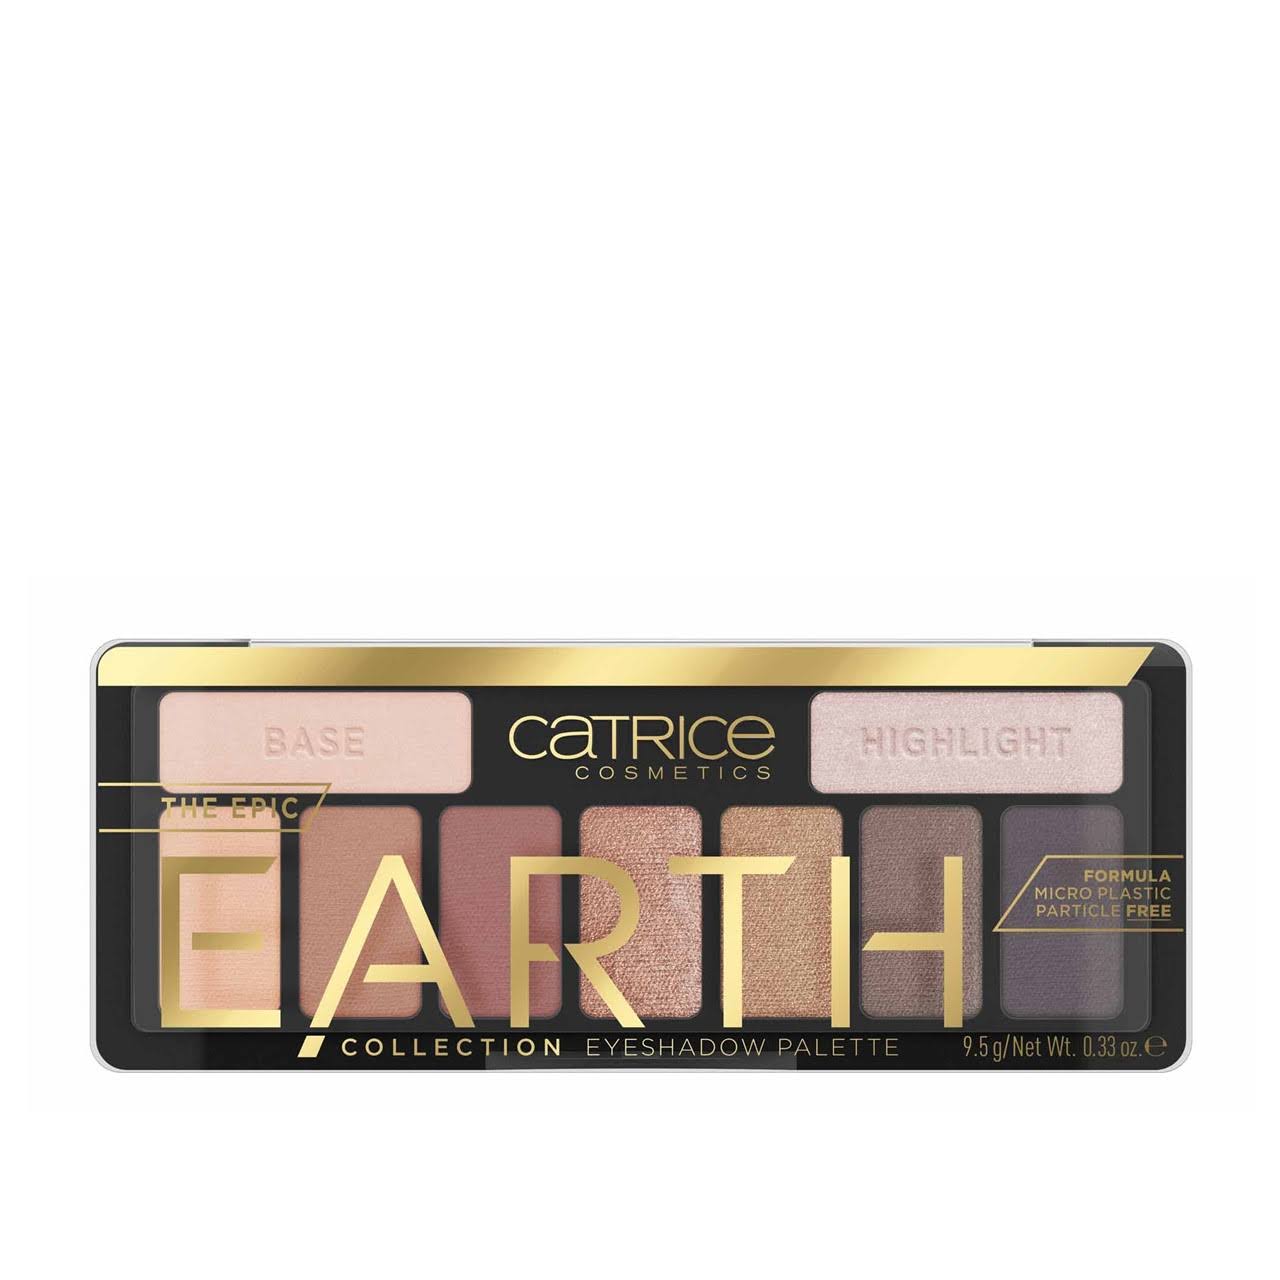 Catrice The Epic Earth Collection Eyeshadow Palette #010